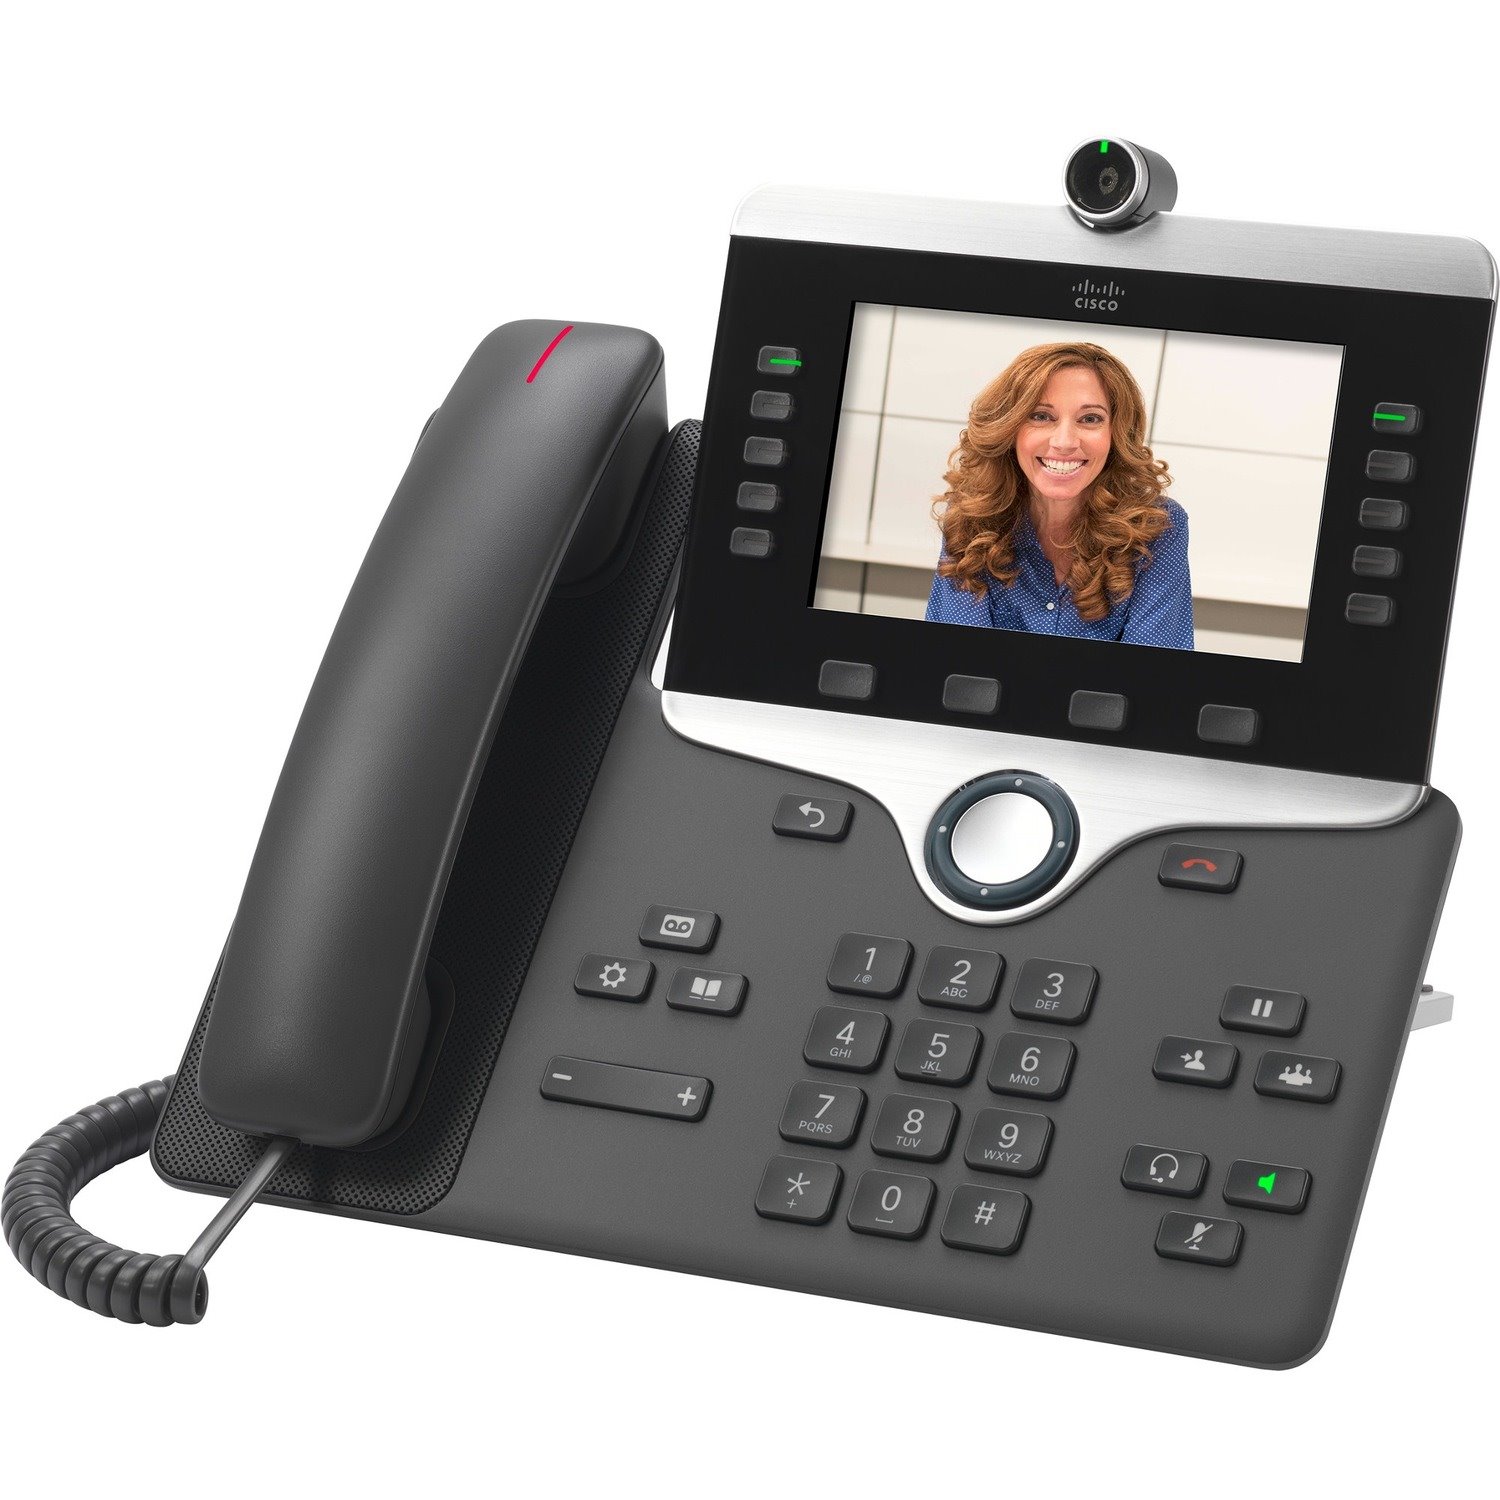 Cisco IP Video Phone 8845 shipped with multiplatform phone firmware